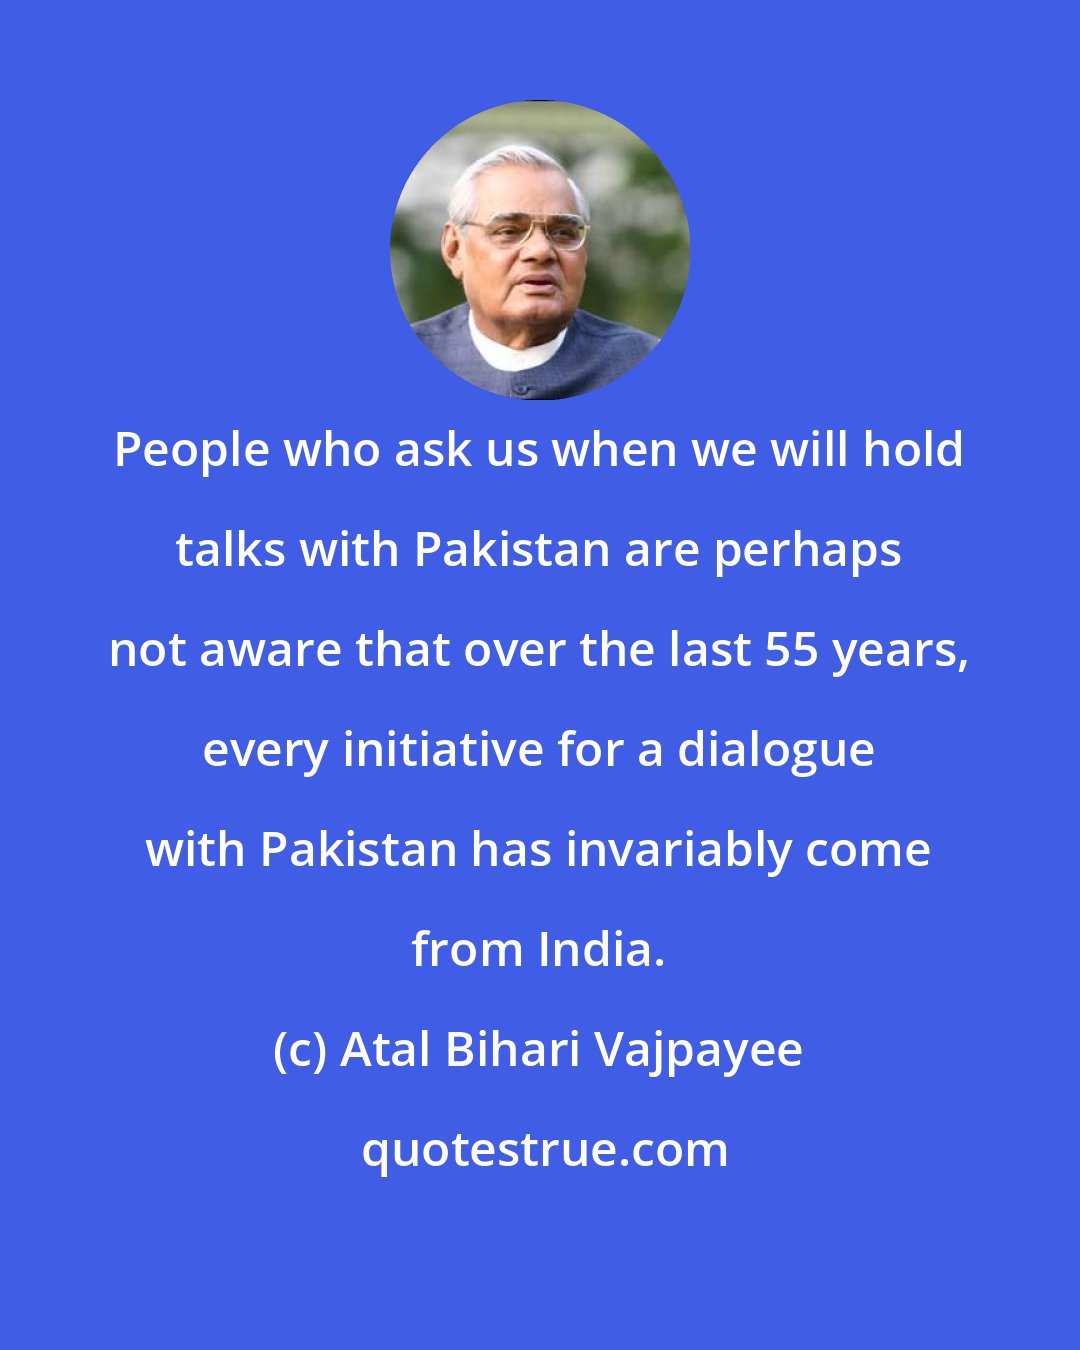 Atal Bihari Vajpayee: People who ask us when we will hold talks with Pakistan are perhaps not aware that over the last 55 years, every initiative for a dialogue with Pakistan has invariably come from India.